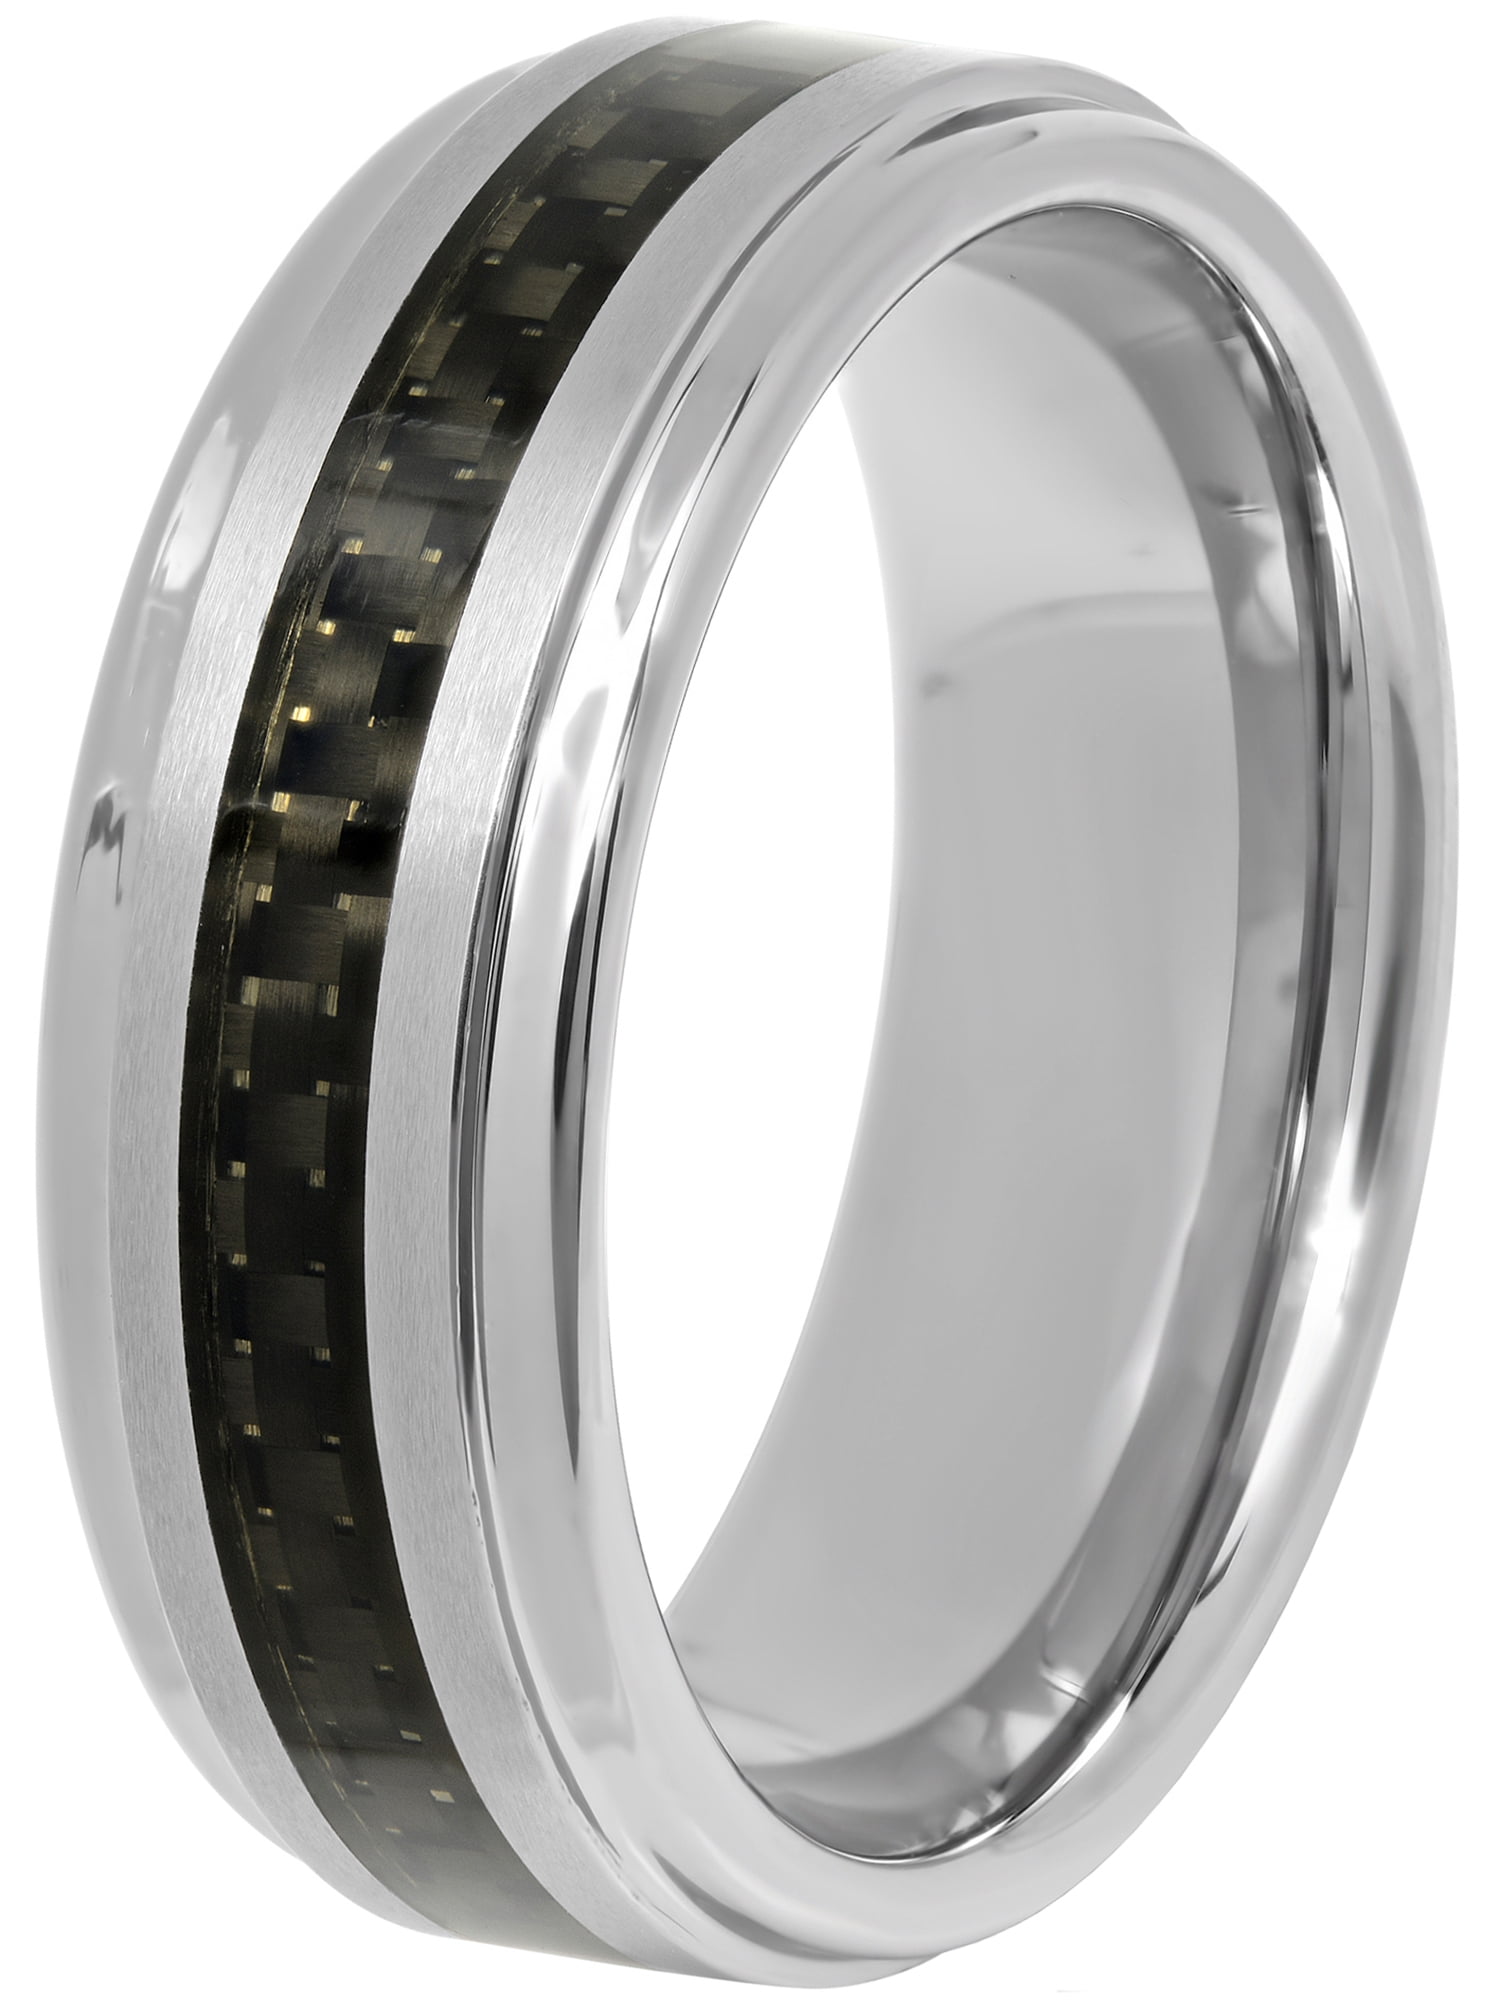 Details about   Tungsten Wedding Band,8MM,Carbon Fiber,CZ,Engagement,Beveled,His,Her,Comfort Fit 